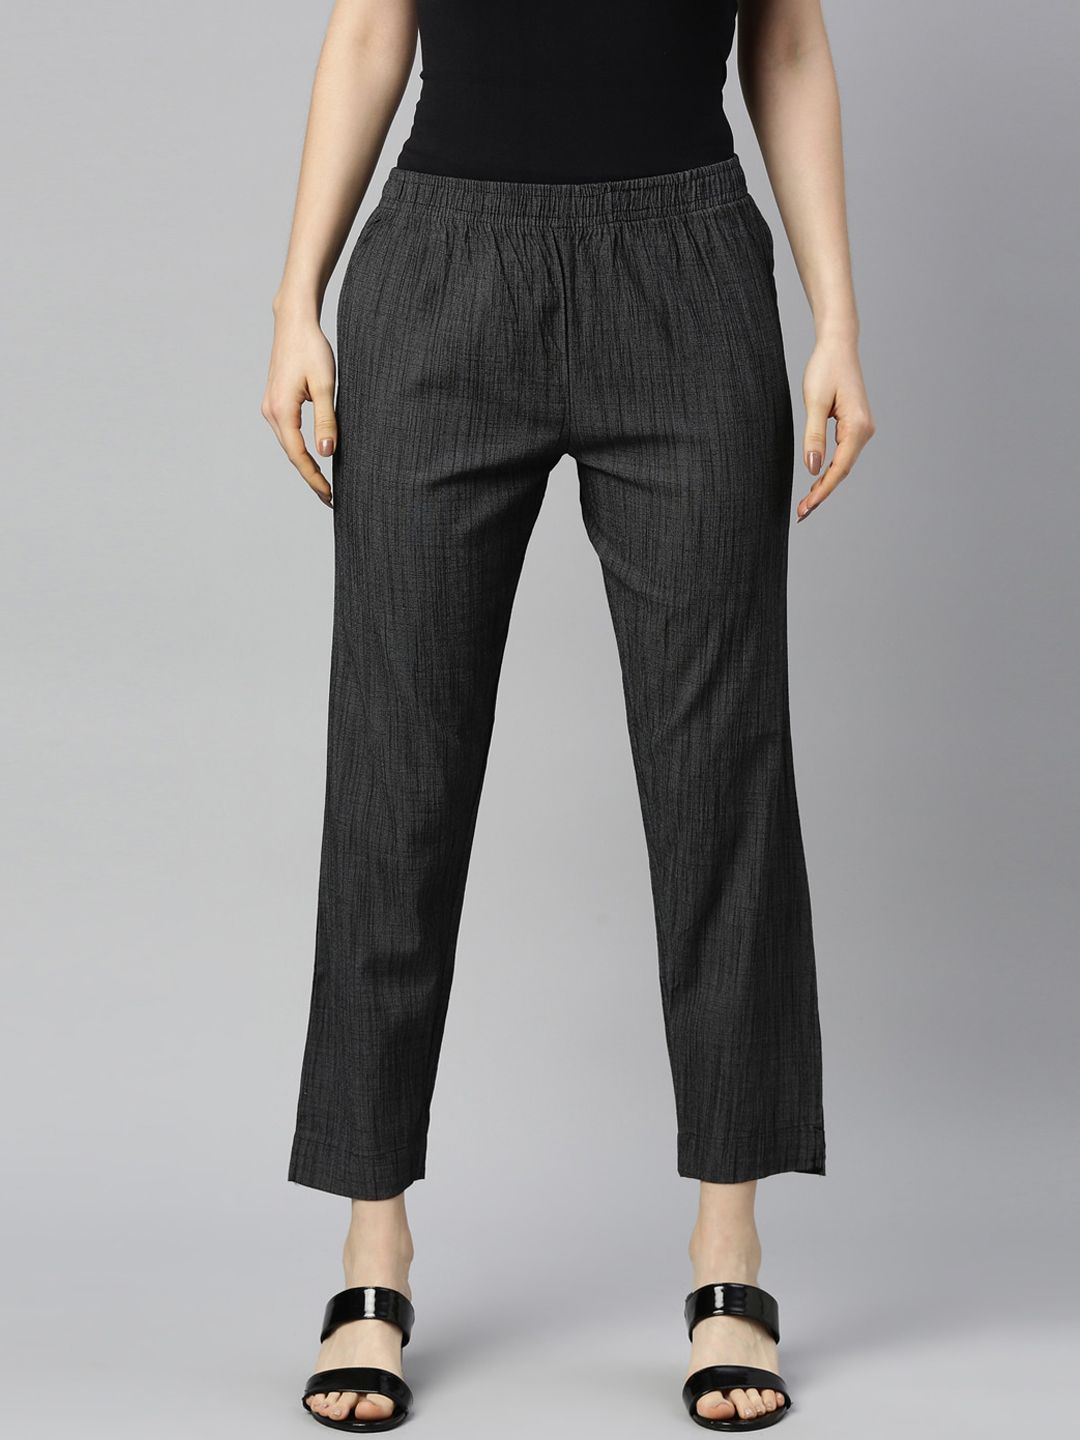 GOLDSTROMS Women Charcoal Striped Trousers Price in India